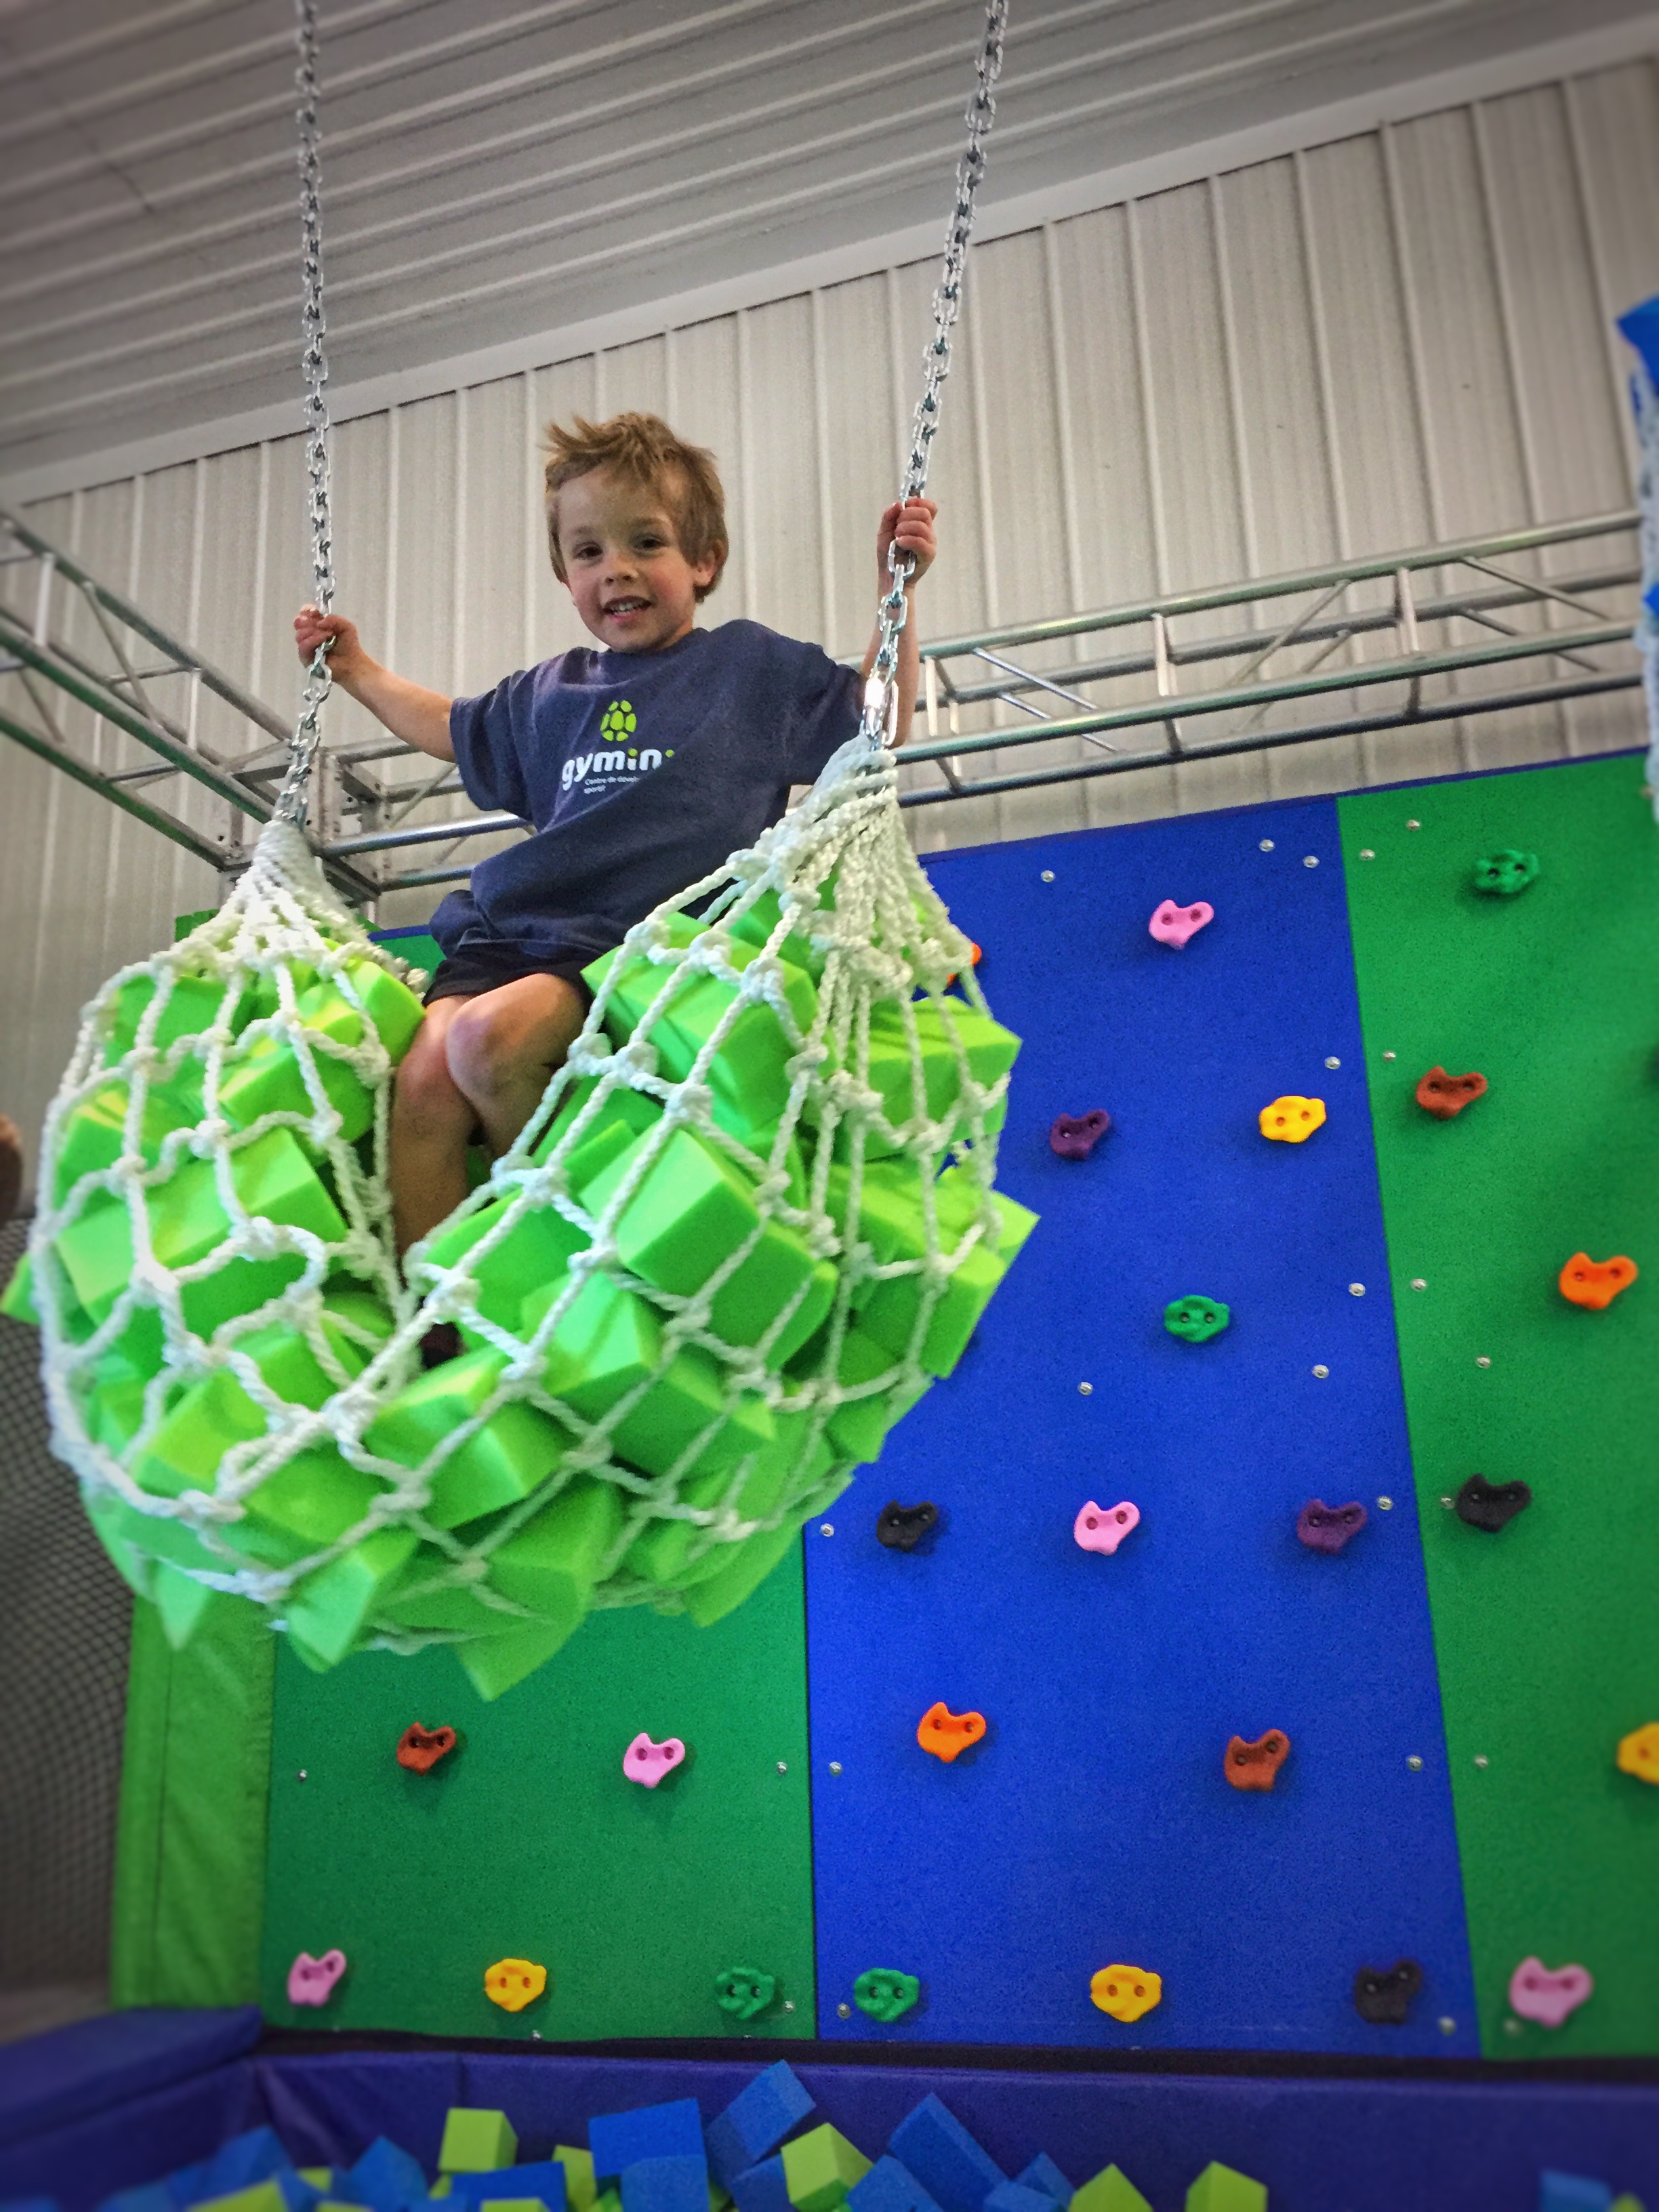 How to optimise climbing walls